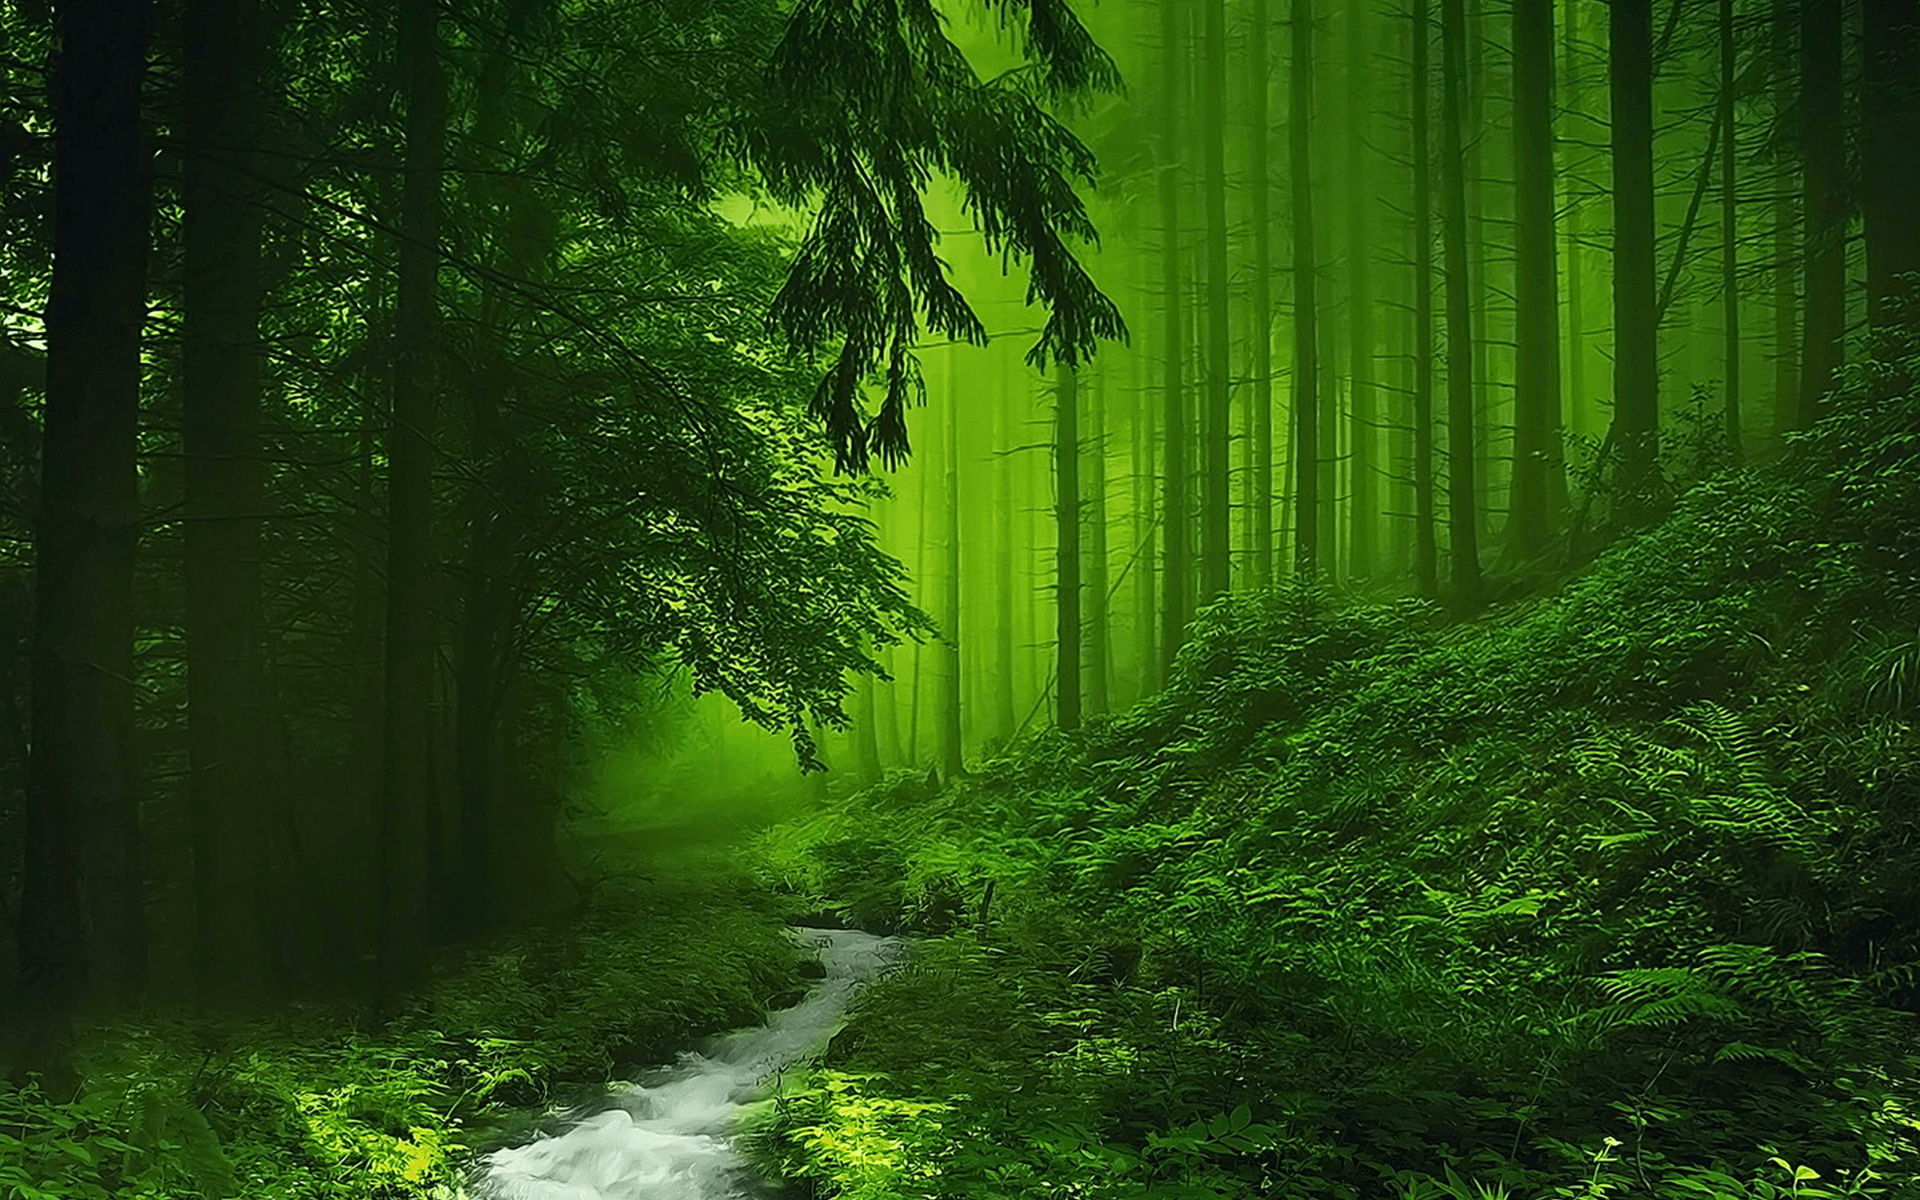 River in Green Misty Forest HD Wallpaper. Background Image